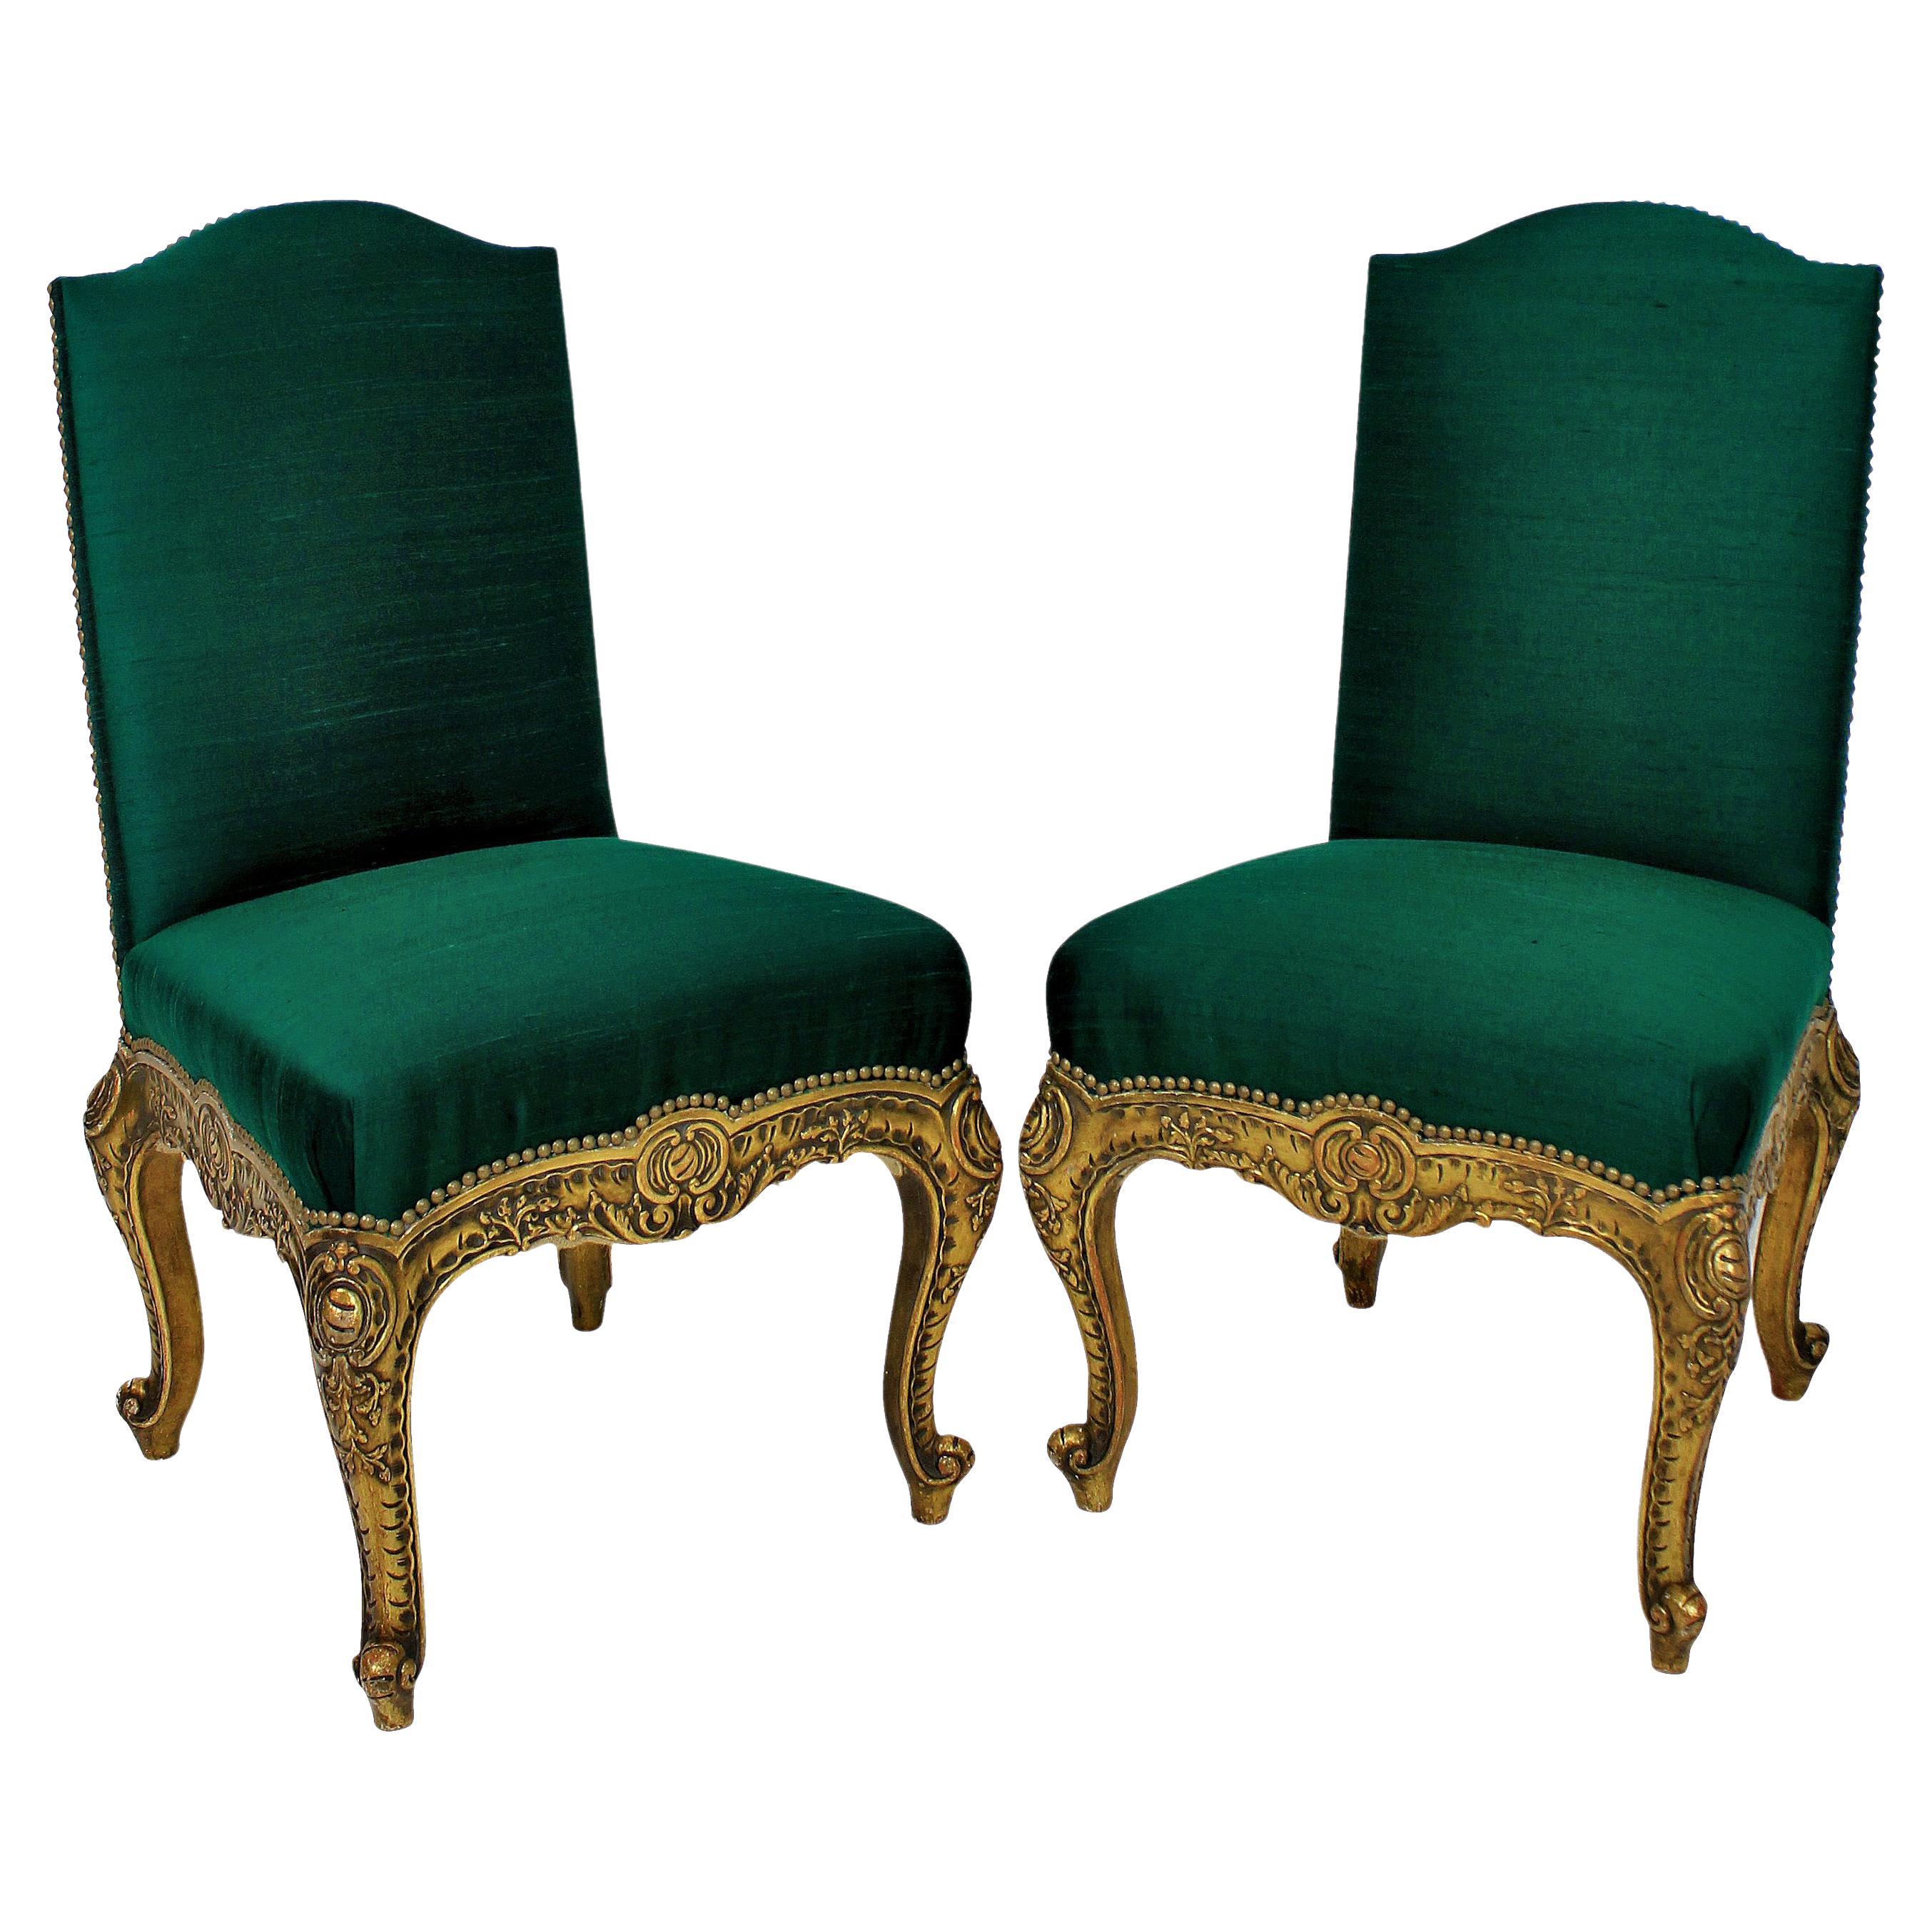 Pair of 19th Century Spanish Giltwood Chairs For Sale